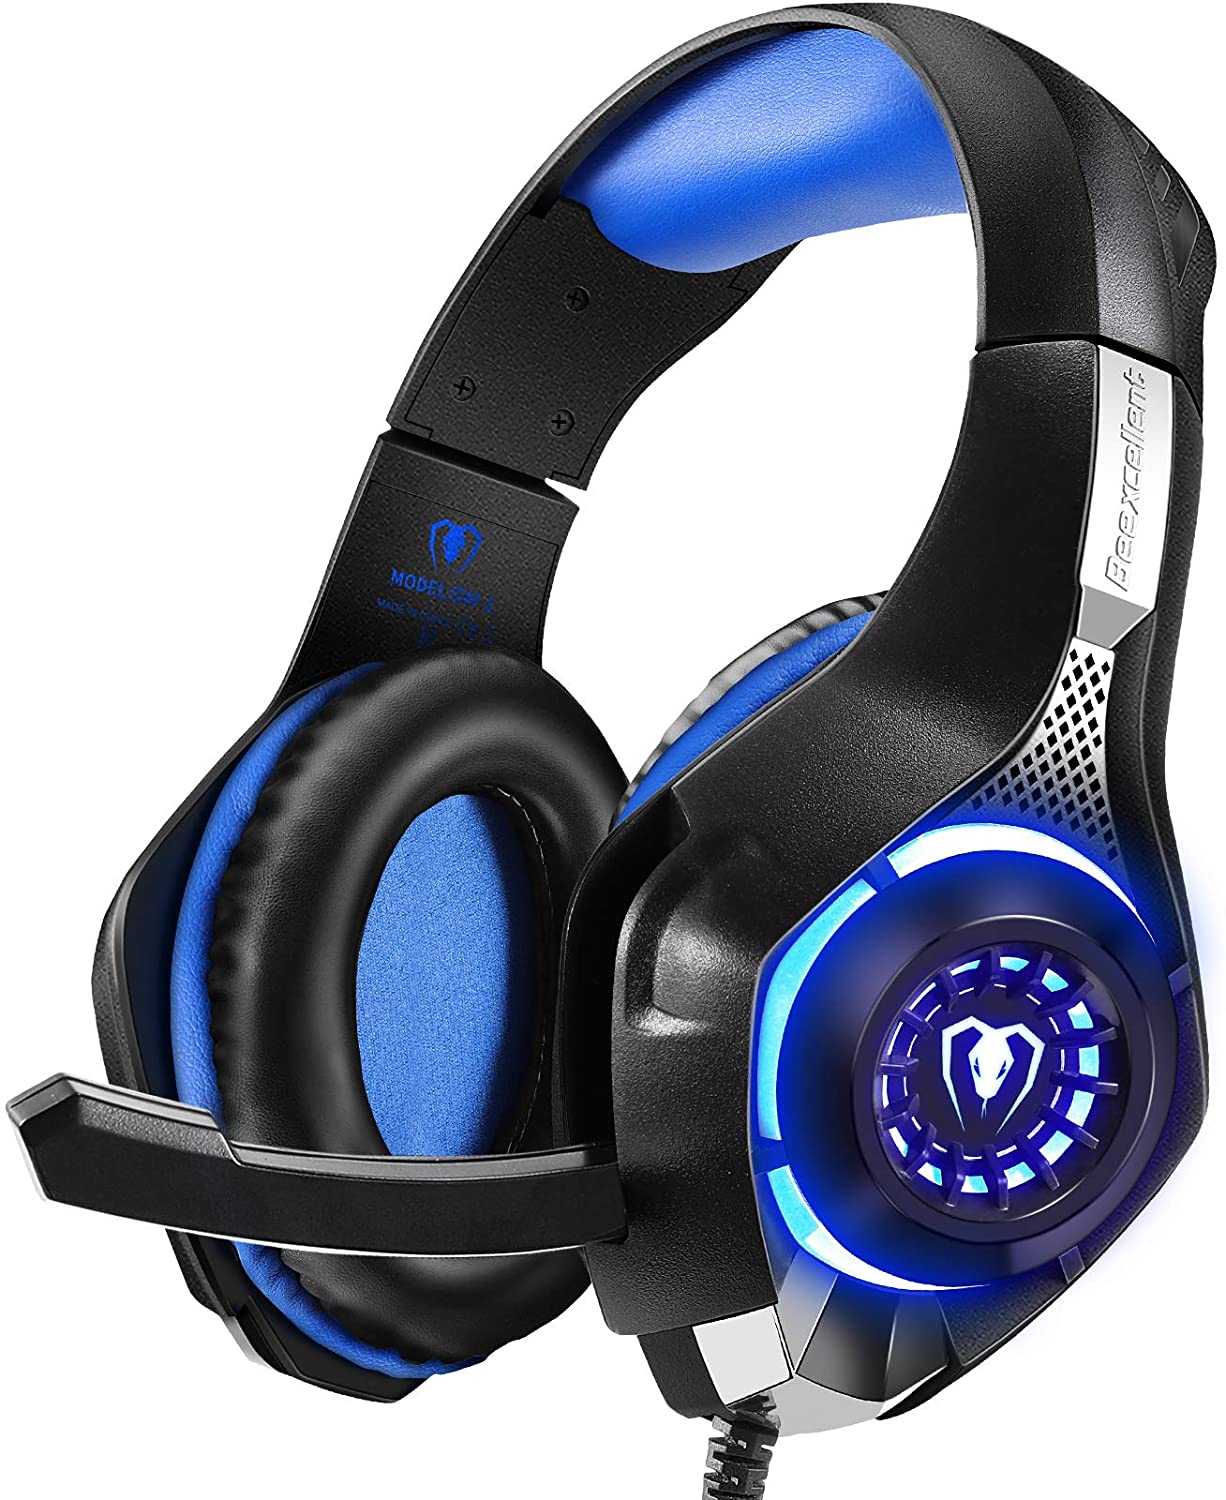 Beexcellent GM-1 Gaming Headset